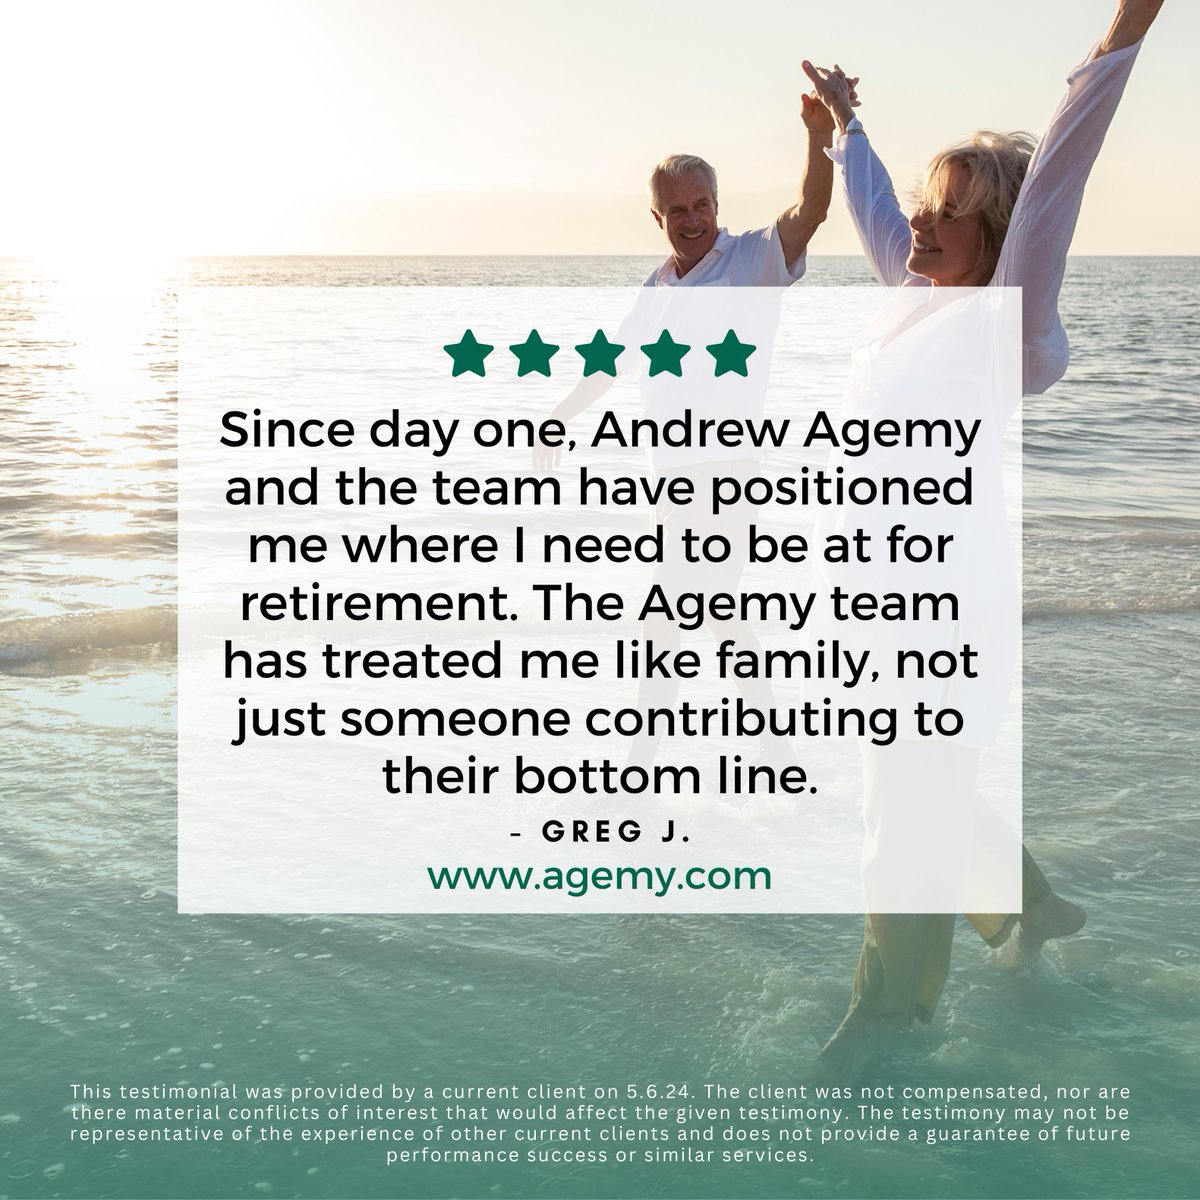 For over 30 years, #AgemyFinancialStrategies has helped our clients plan & prepare for #retirement.

Our #fiduciaries work hard to deliver a reliable #retirementincomestrategy to help clients enjoy a #worryfreeretirement.

Contact us today at agemy.com.